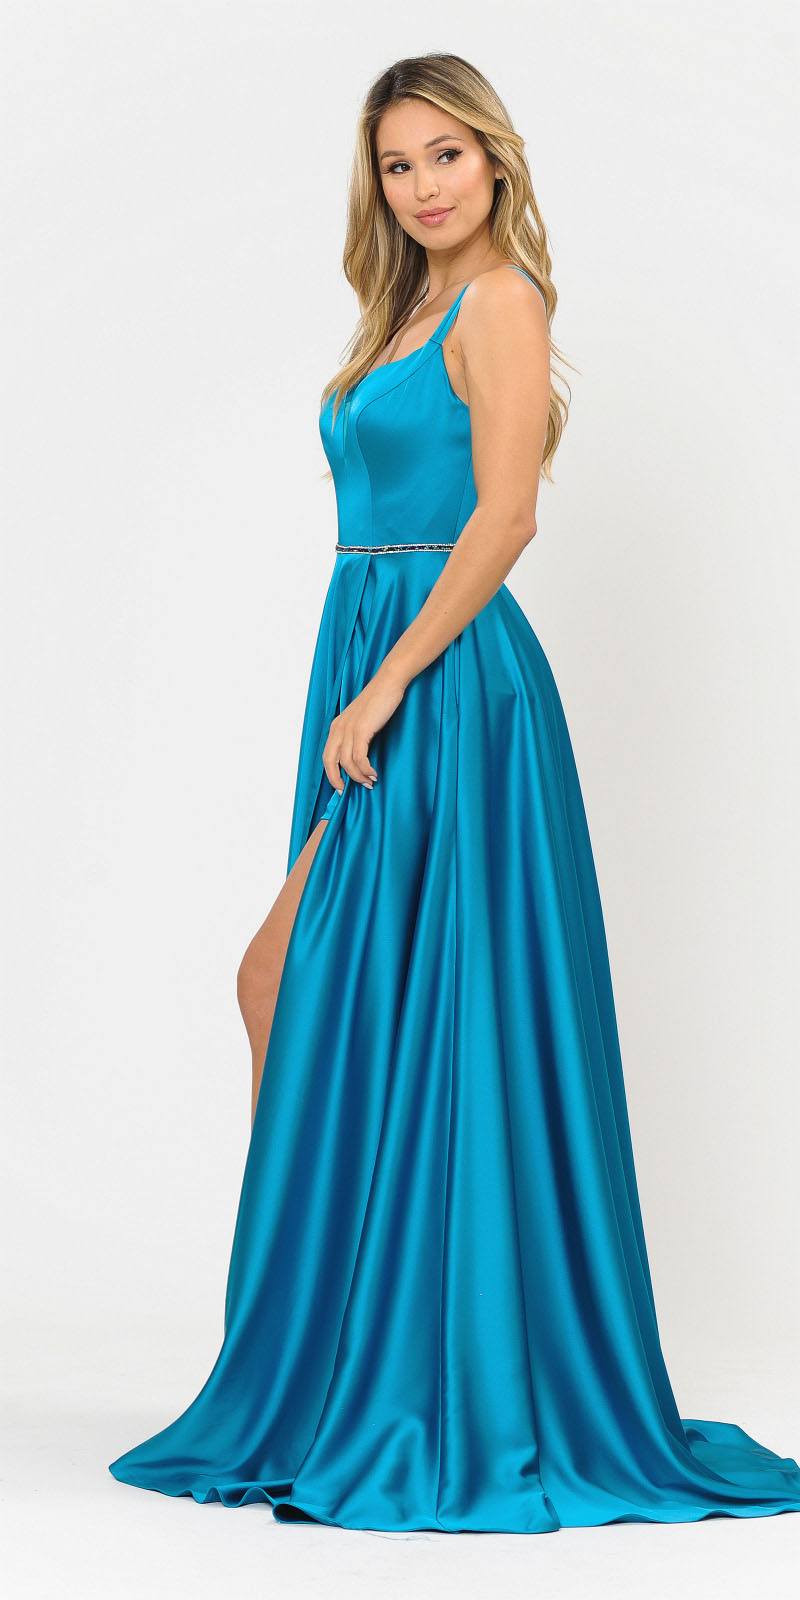 Teal Romper Style Long Prom Dress with Pockets